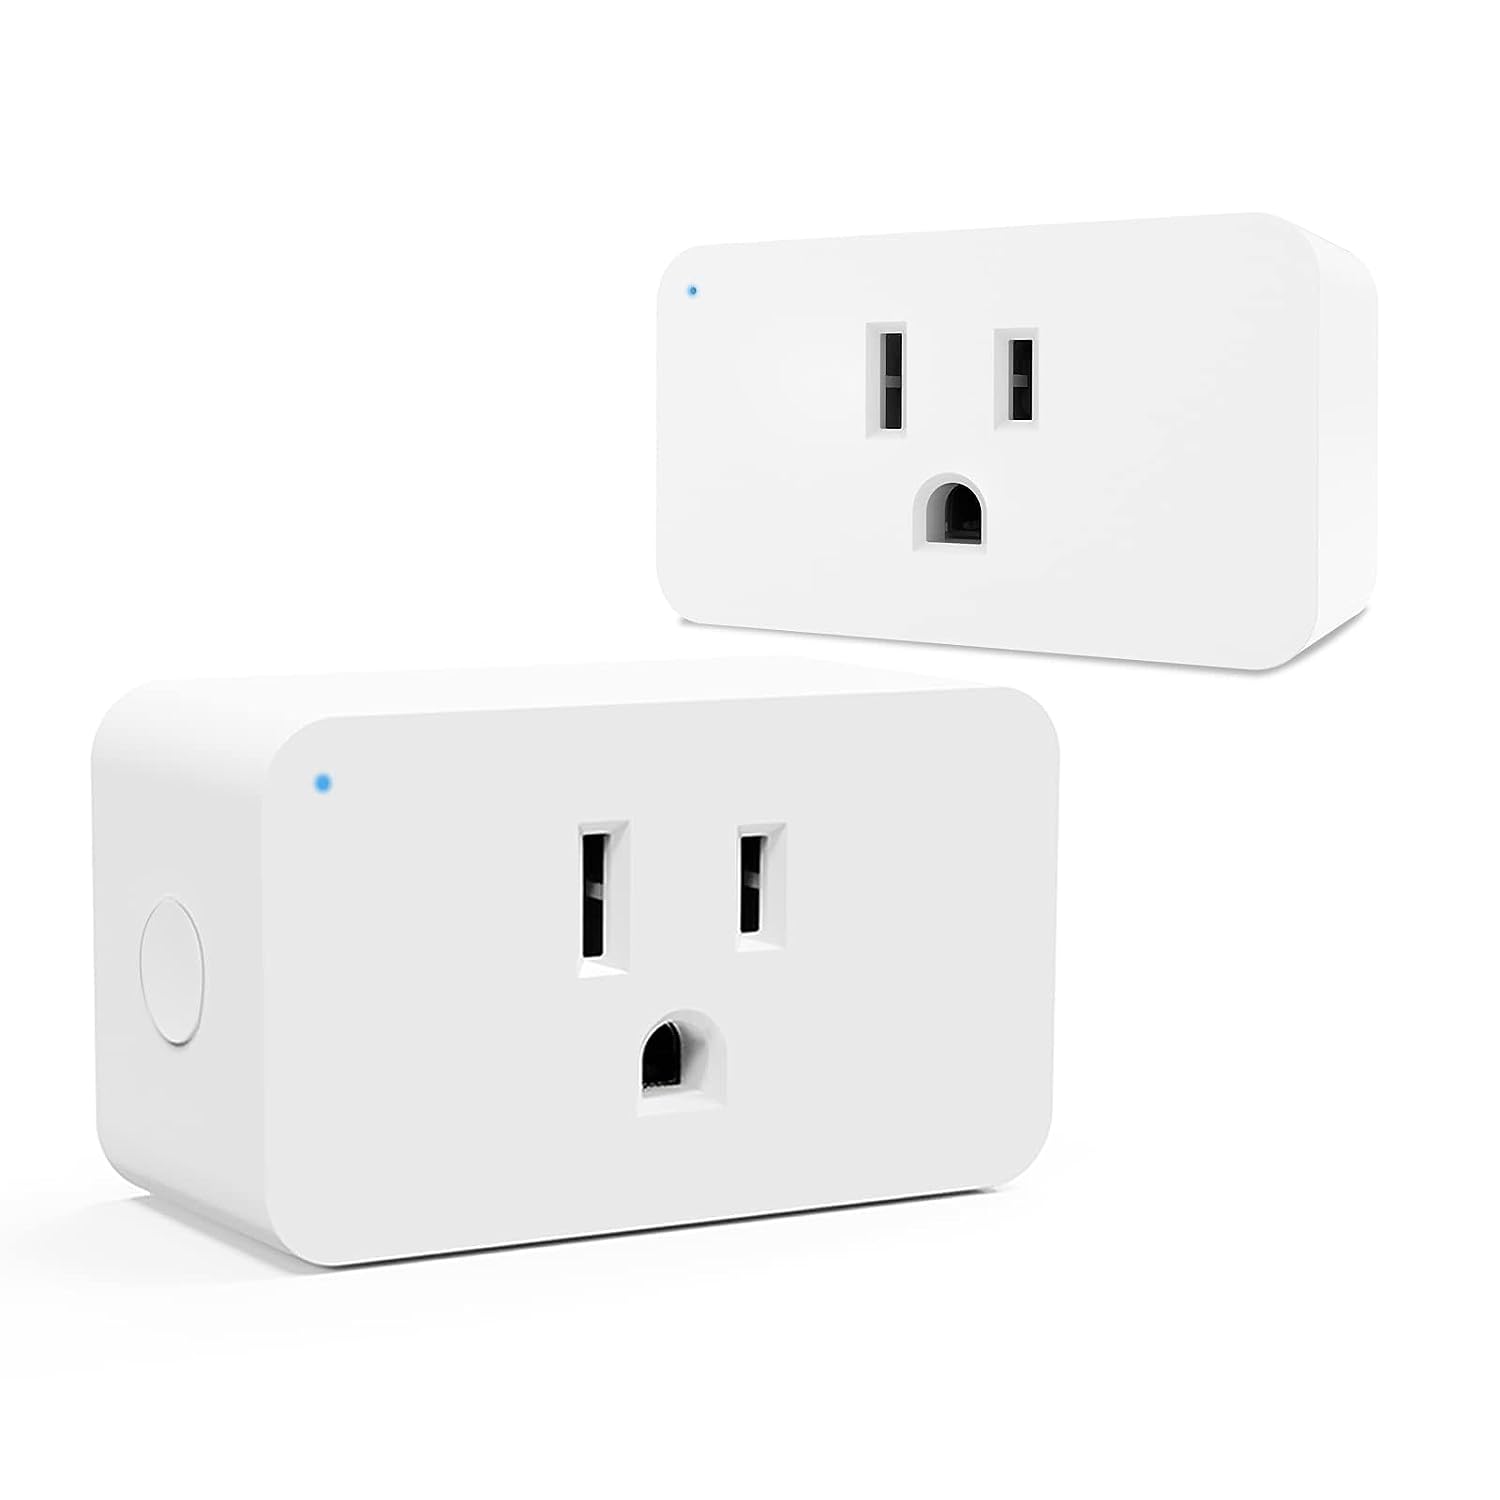 New One Smart Plug 4 Pack, 2.4G WiFi Smart On/Off Outlet 15A and max 1875W, Voice Control, App Remote Control, Smart Plugs That Work with Alexa, Google Assistant and Smart Life, FCC & ETL Listed